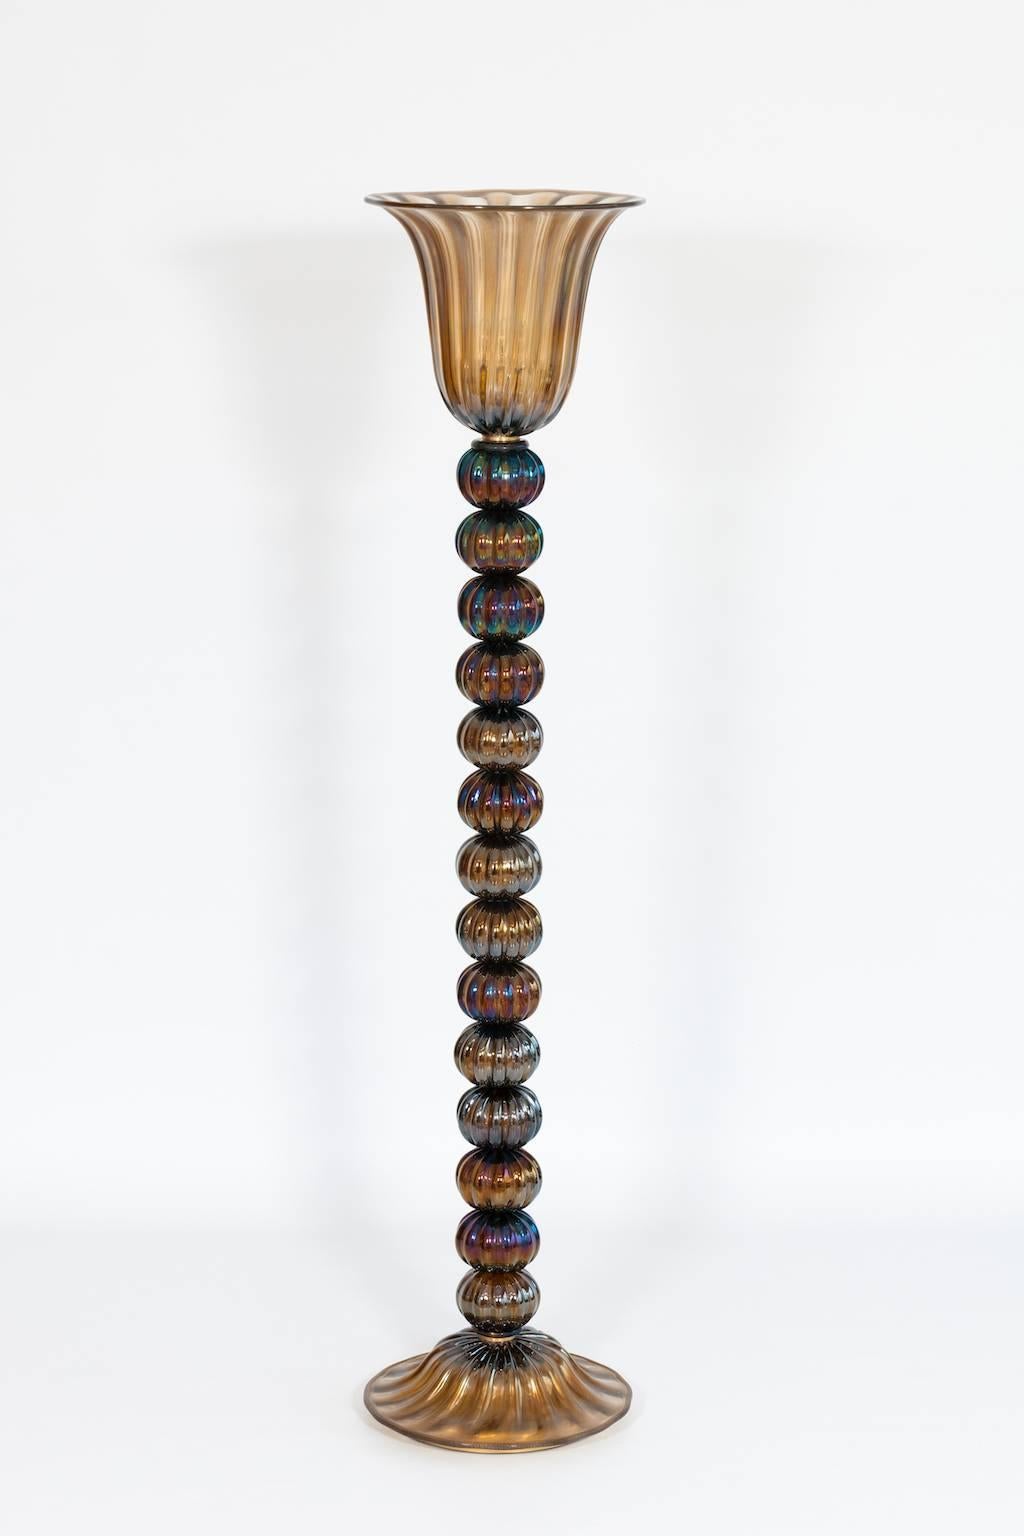 Elegant Italian floor lamp in Murano glass Italian Floor Lamp in Murano Glass pagliesco with iridescent 1980s,  composed by a base and a bowl with inside a light and having in the middle a stem with spheres, all is supported by an elegant brass and